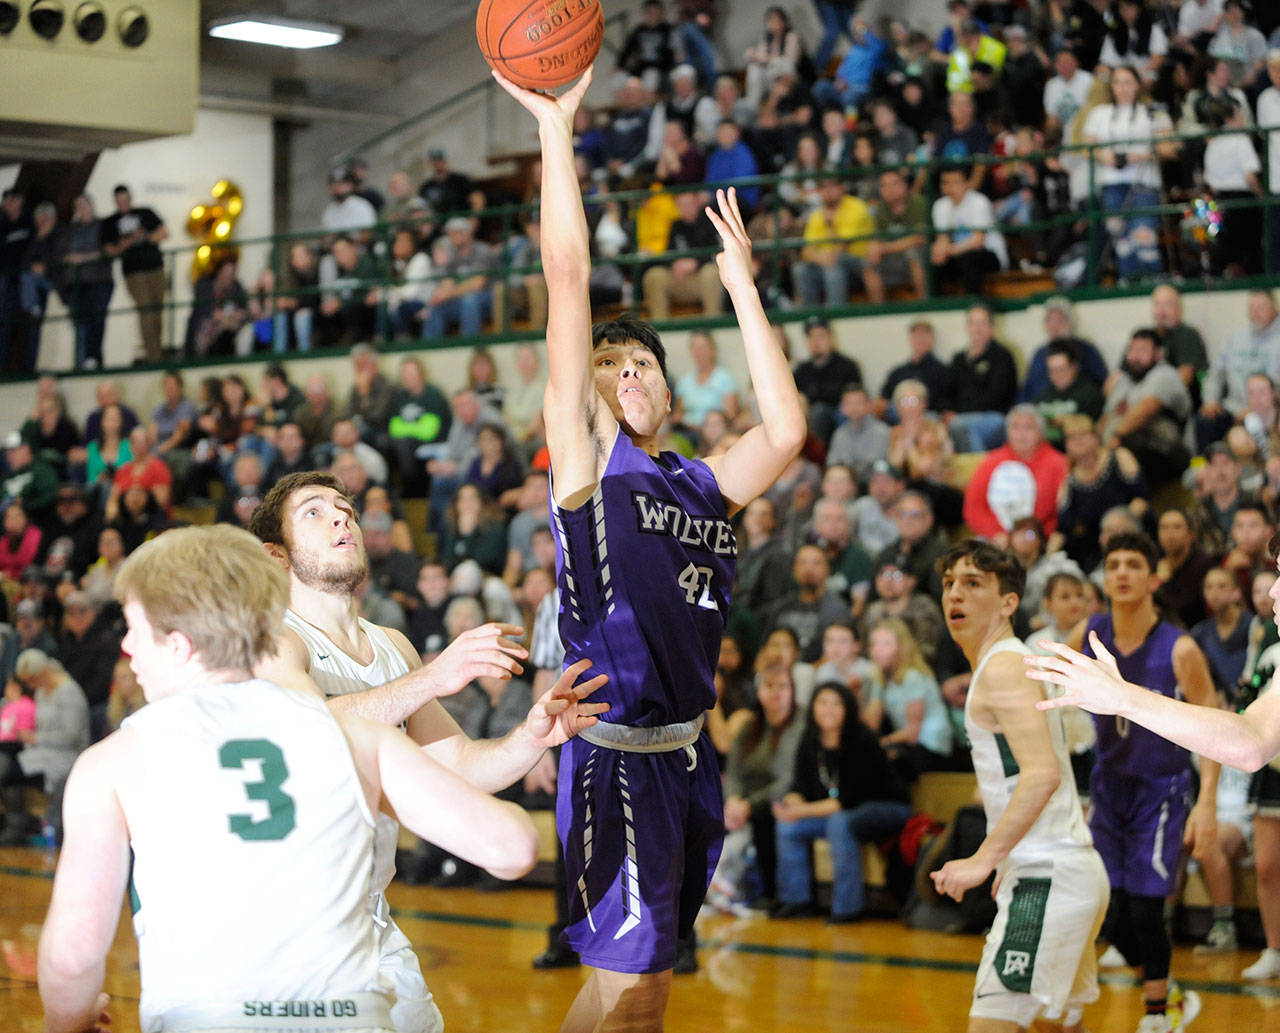 Sequim’s Isaiah Moore, center, puts up a shot over the Port Angeles defense in the Wolves’ 57-32 loss in February. State sport officials said the return of high school sports will be delayed by at least another month and all three prep seasons have been reduced by a week. Sequim Gazette file photo by Michael Dashiell